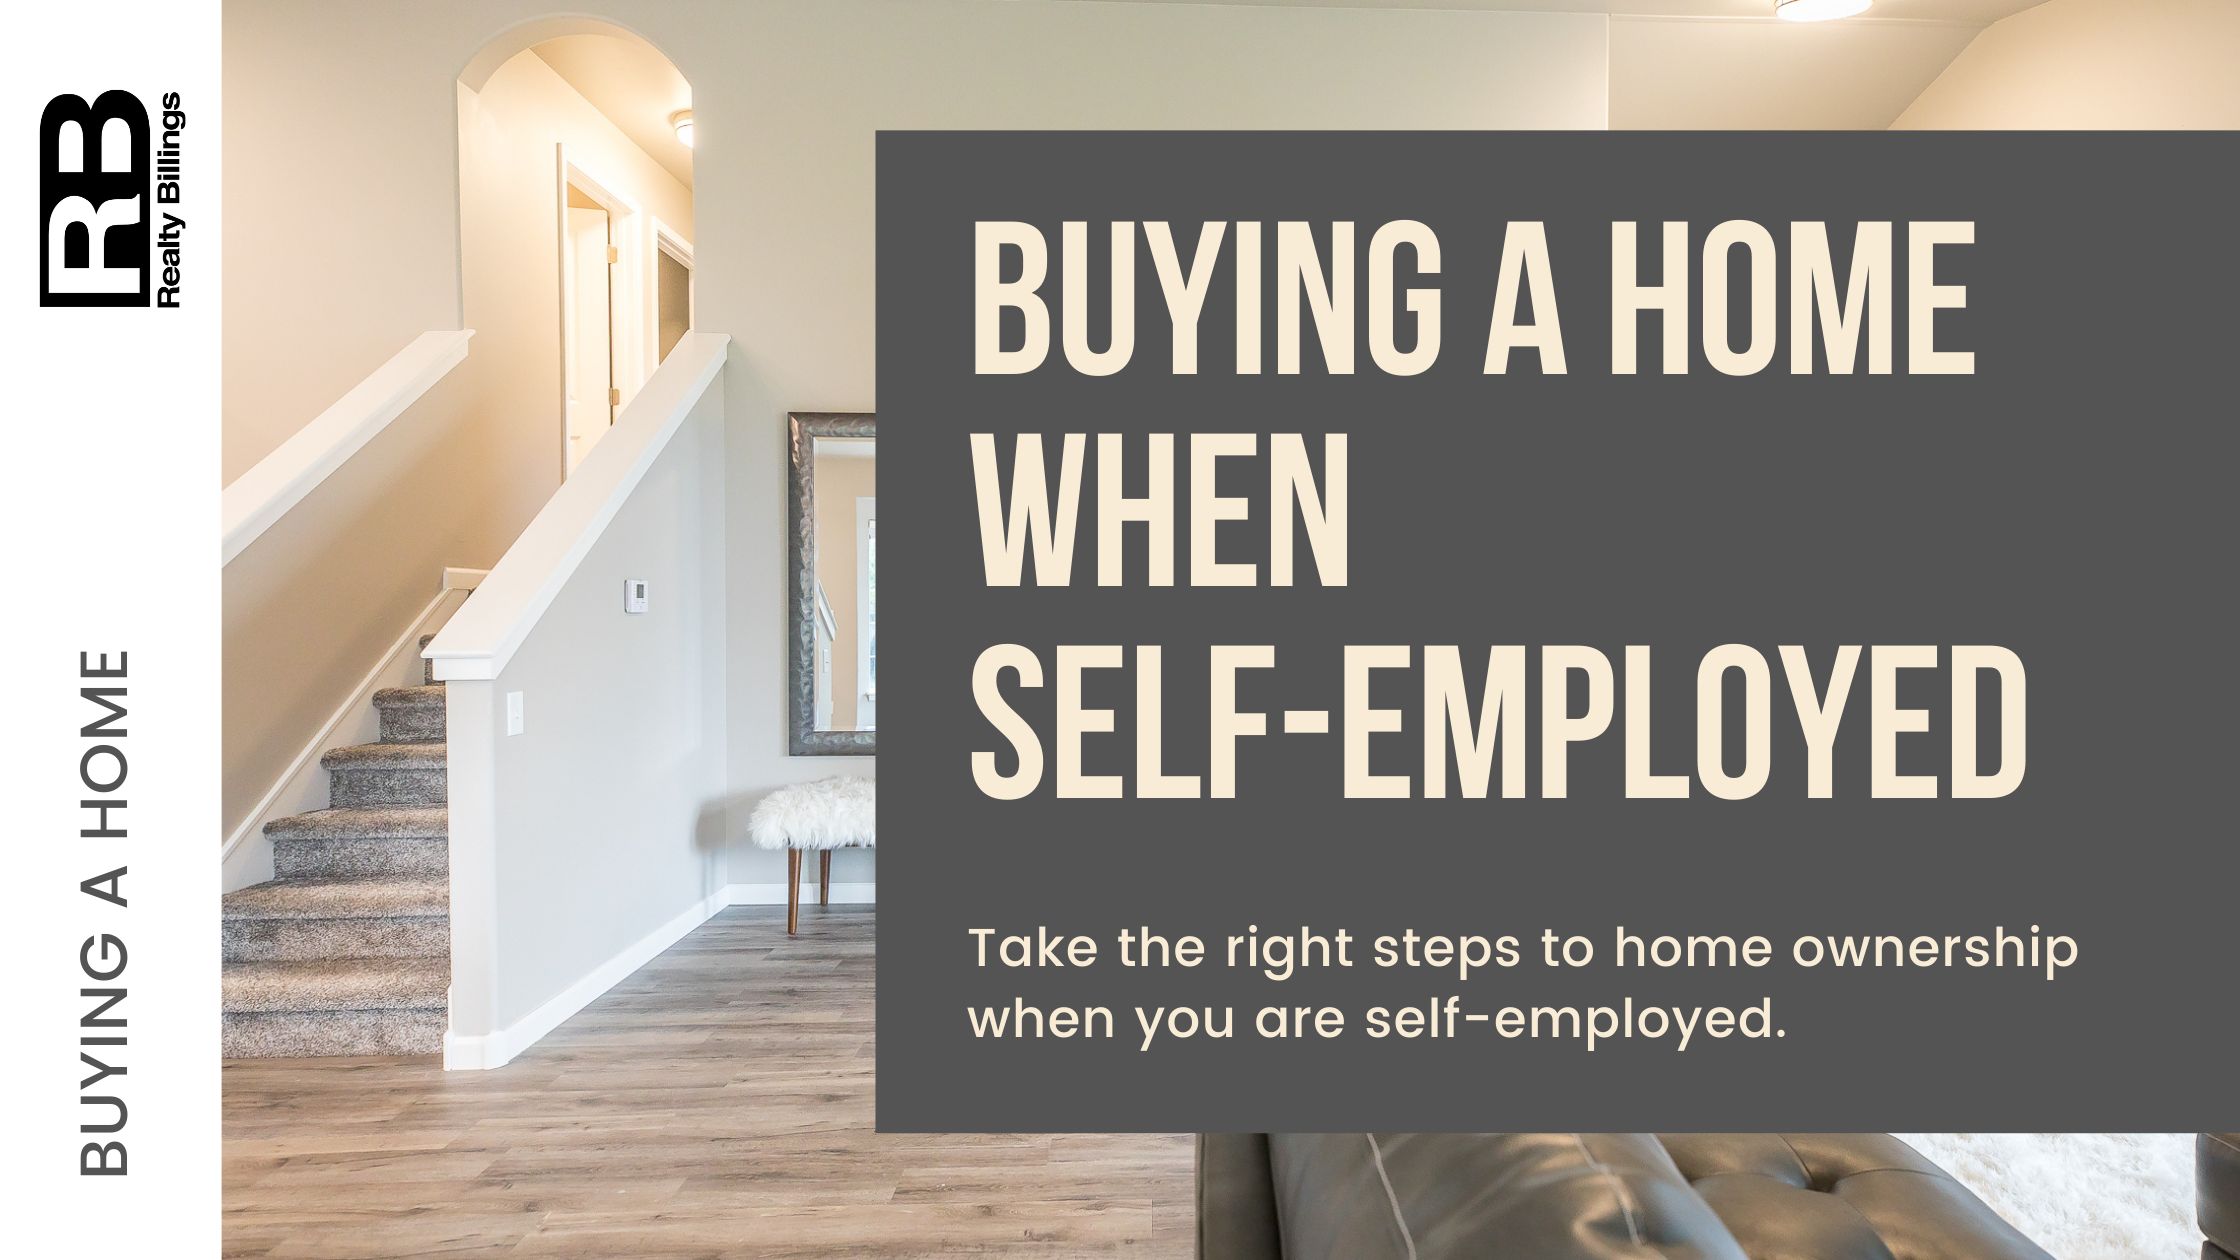 Buying a Home when Self-employed